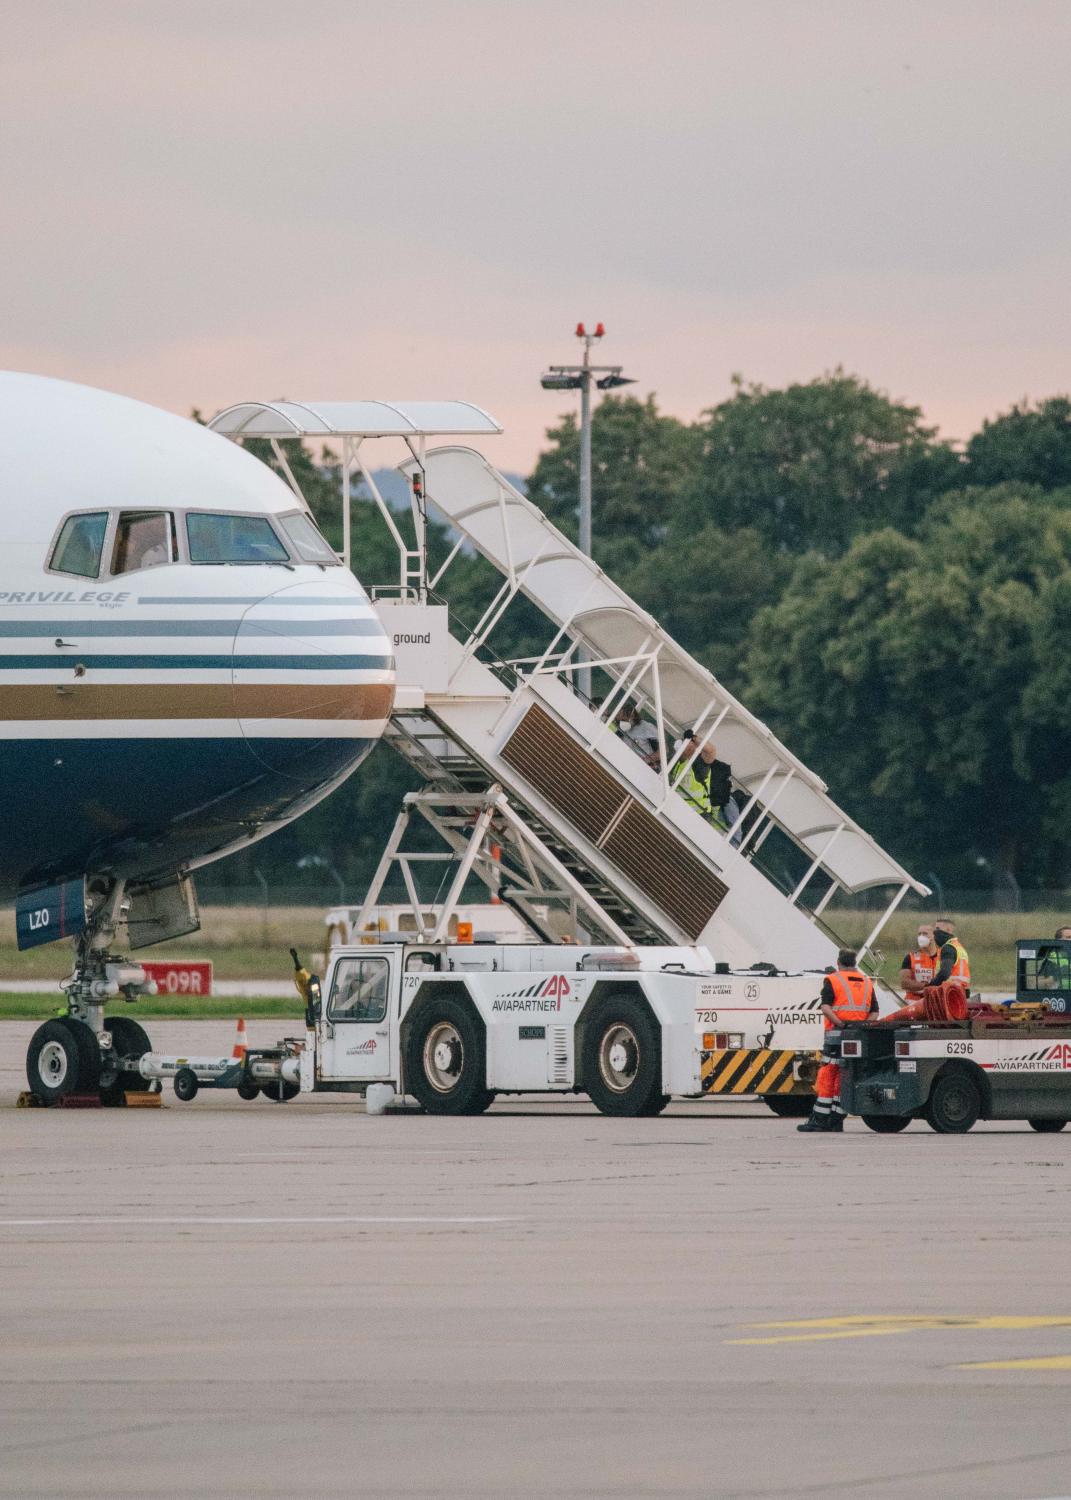 Deportations to Afghanistan - Police officers accompany detainees into a plane at Hanover airfield. July 6th, 2021